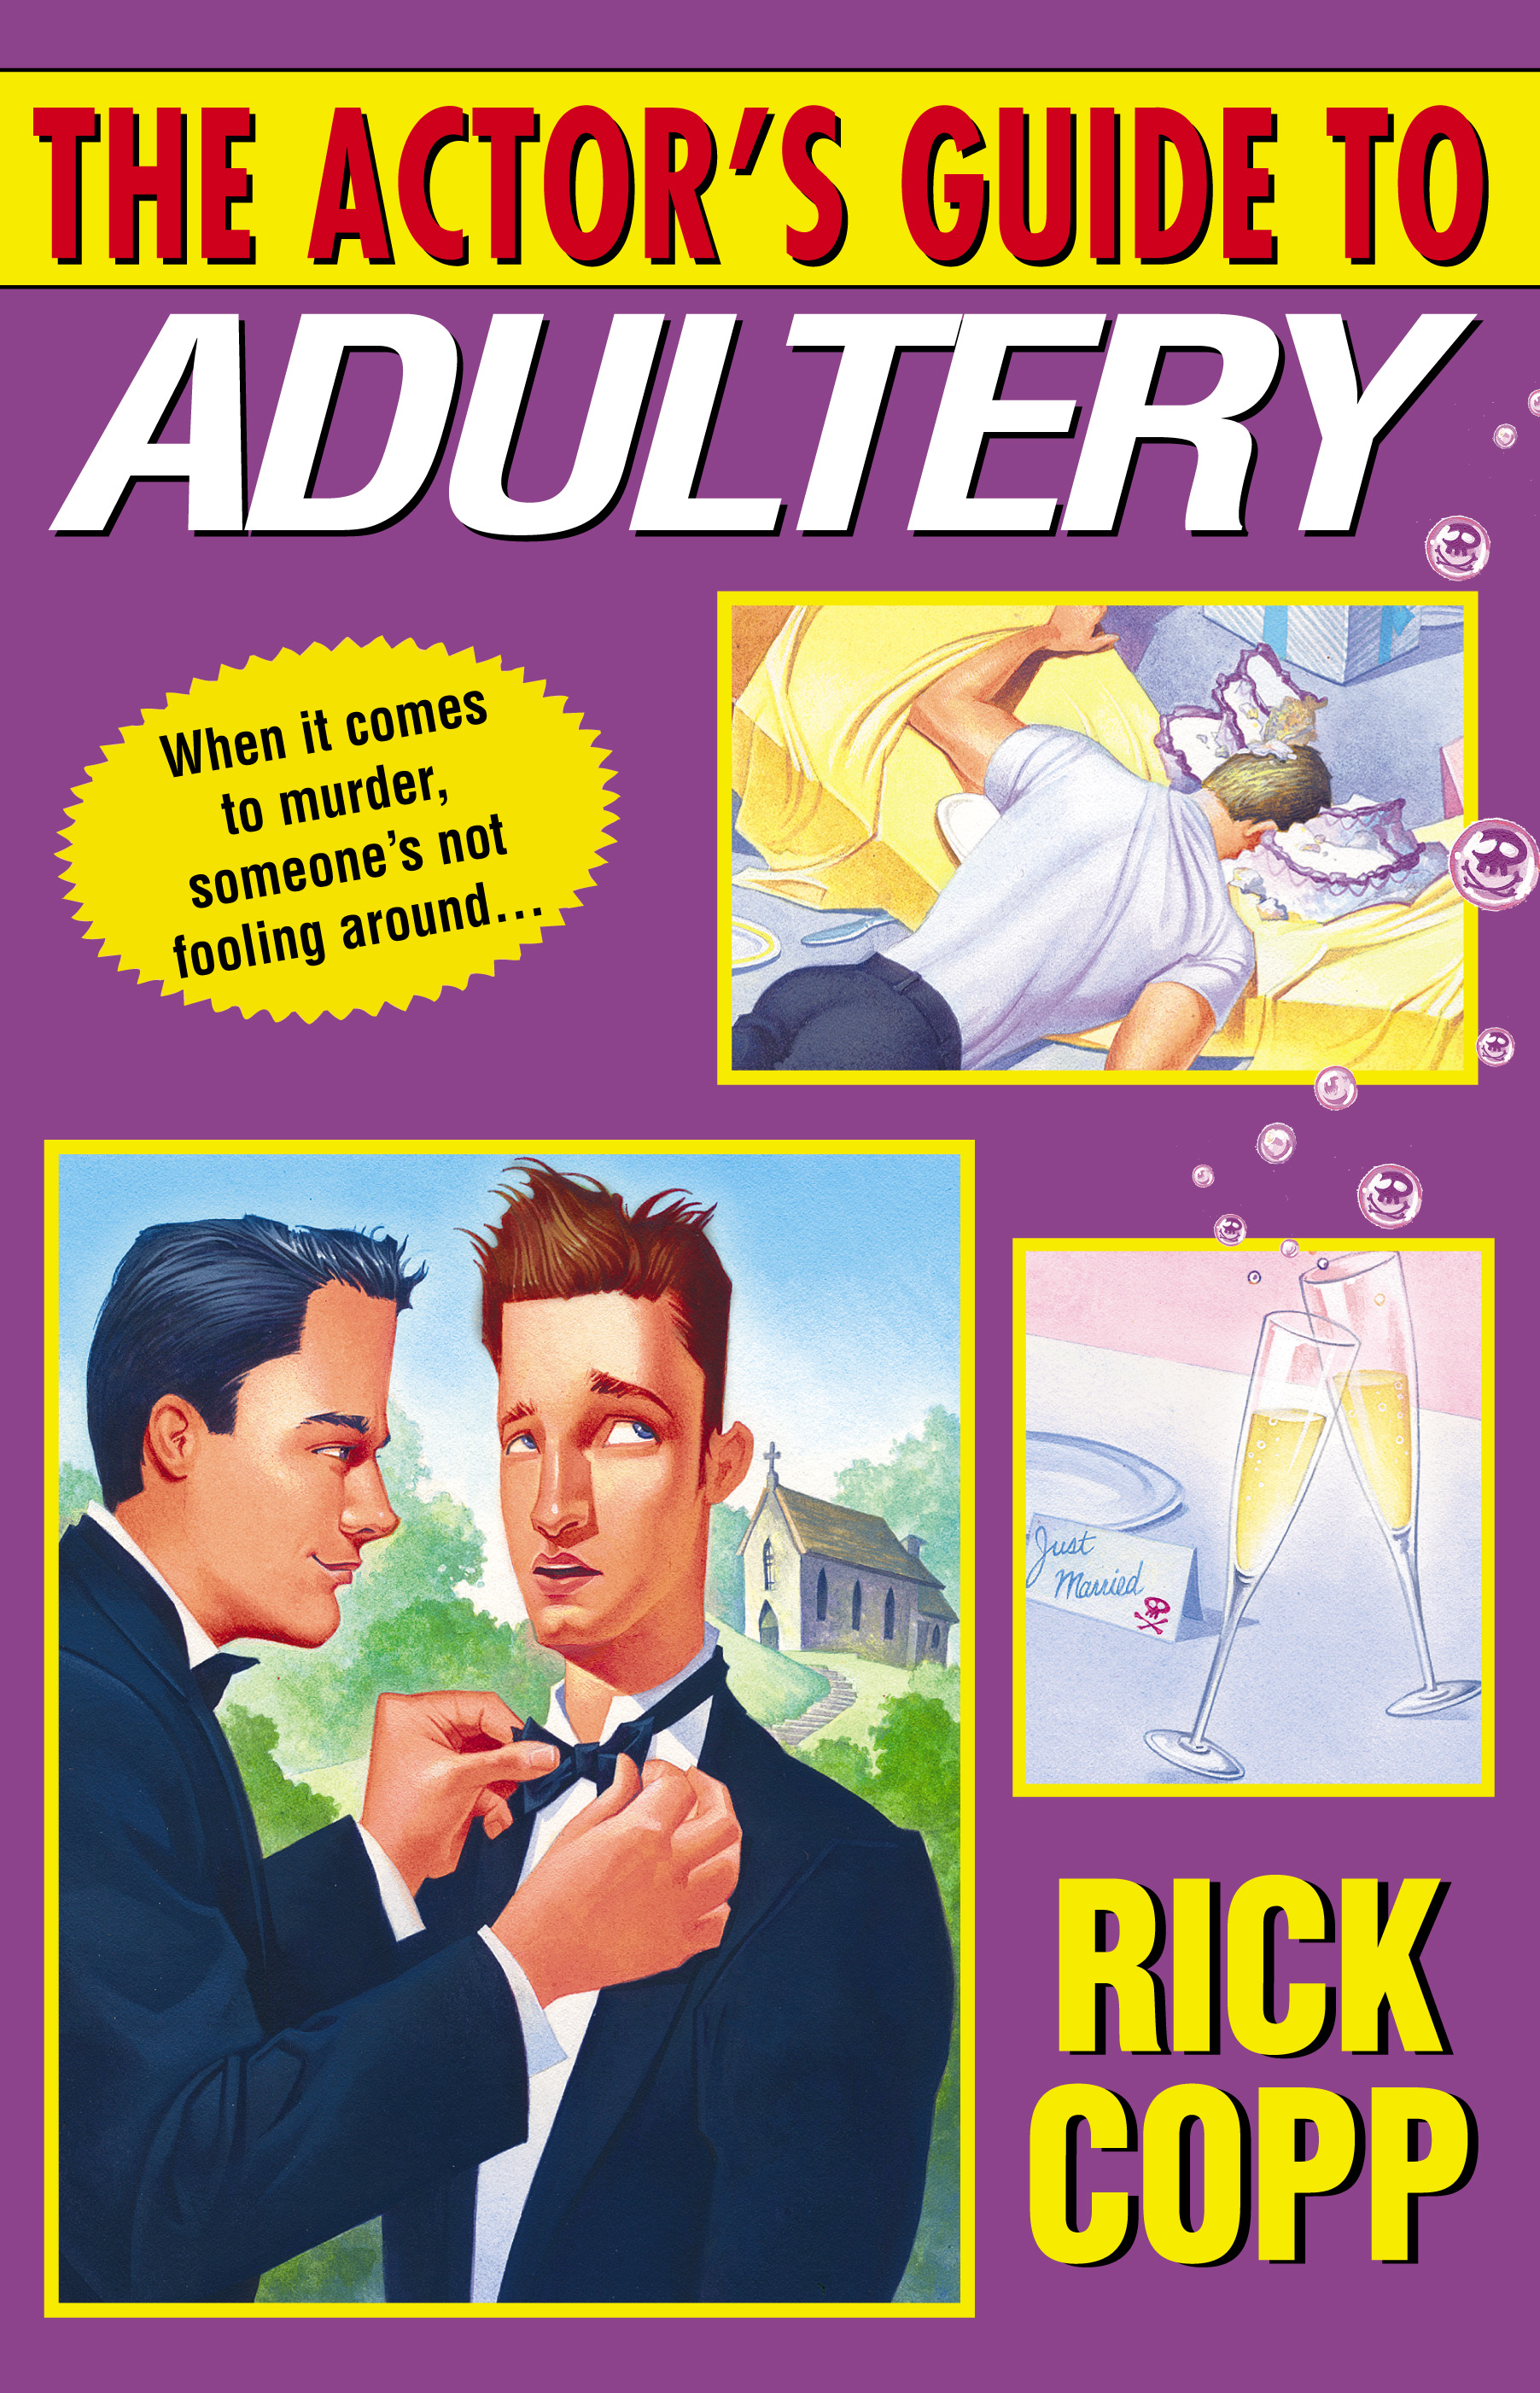 THE ACTOR'S GUIDE TO ADULTERY, Kensington Publishing Corp, 2004